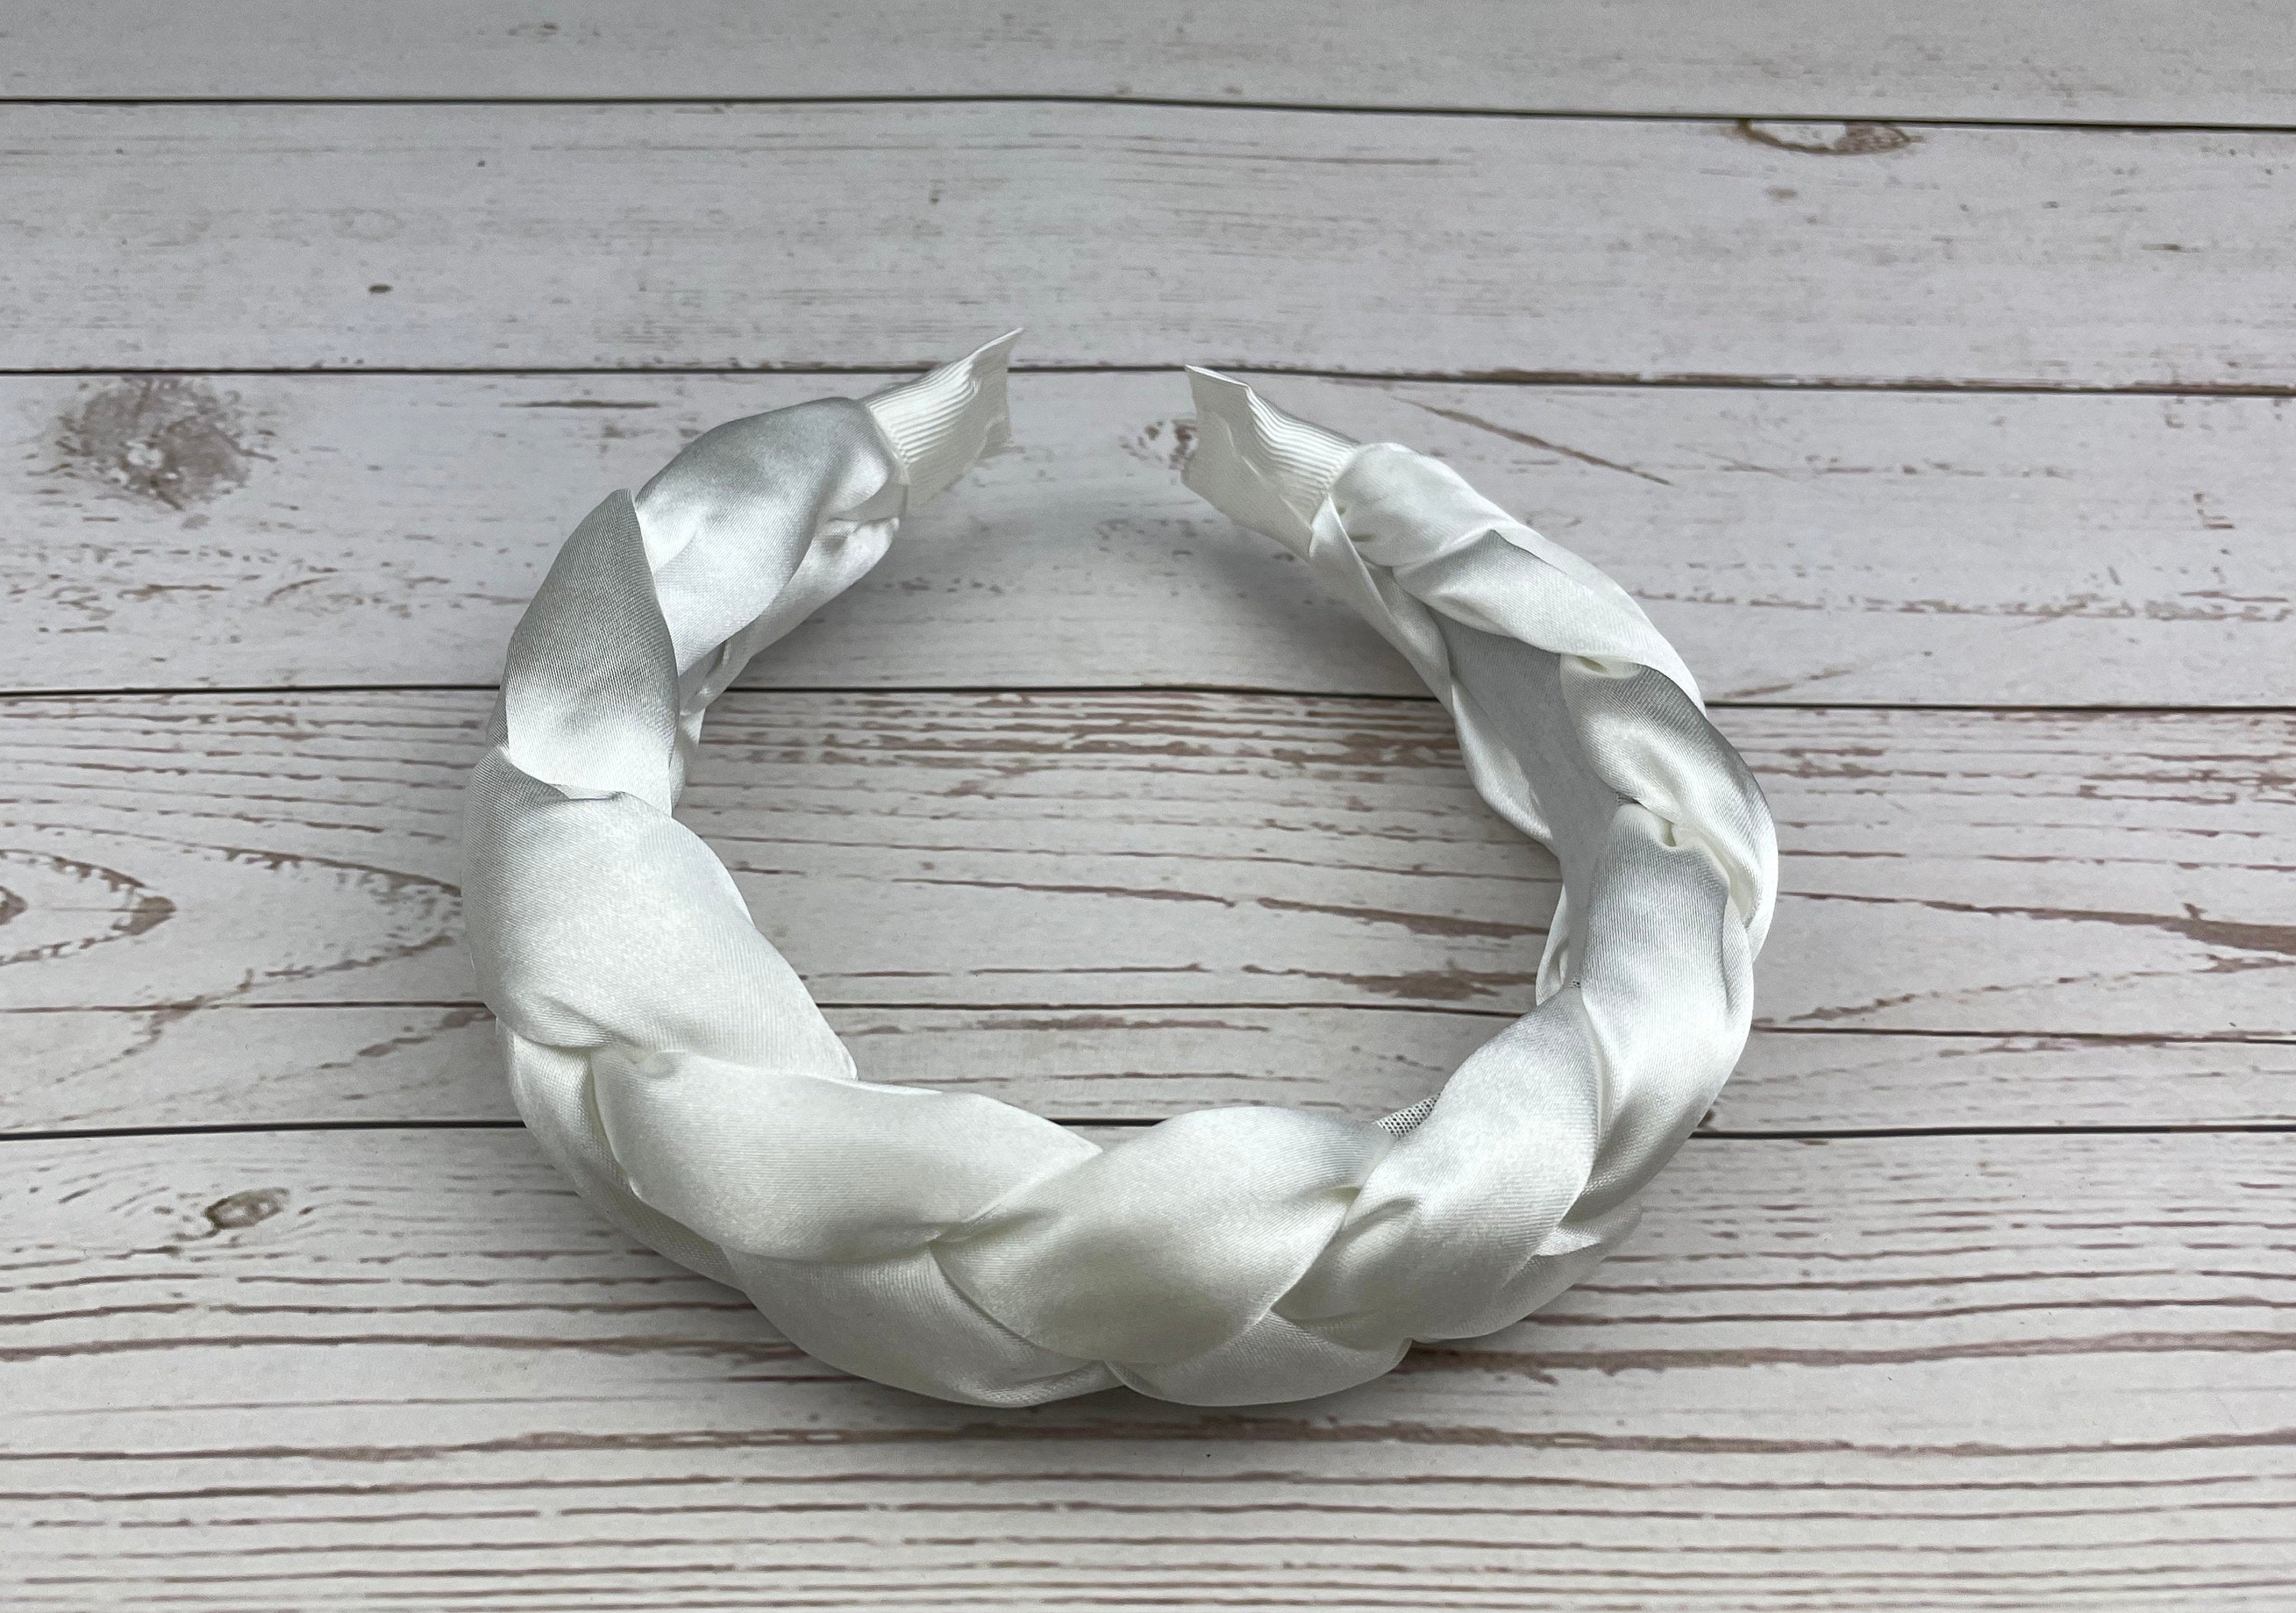 Stay comfortable and stylish at any celebration with this Snow White Padded Satin Knitted Headband for women. The perfect accessory for adding a touch of elegance to any outfit.